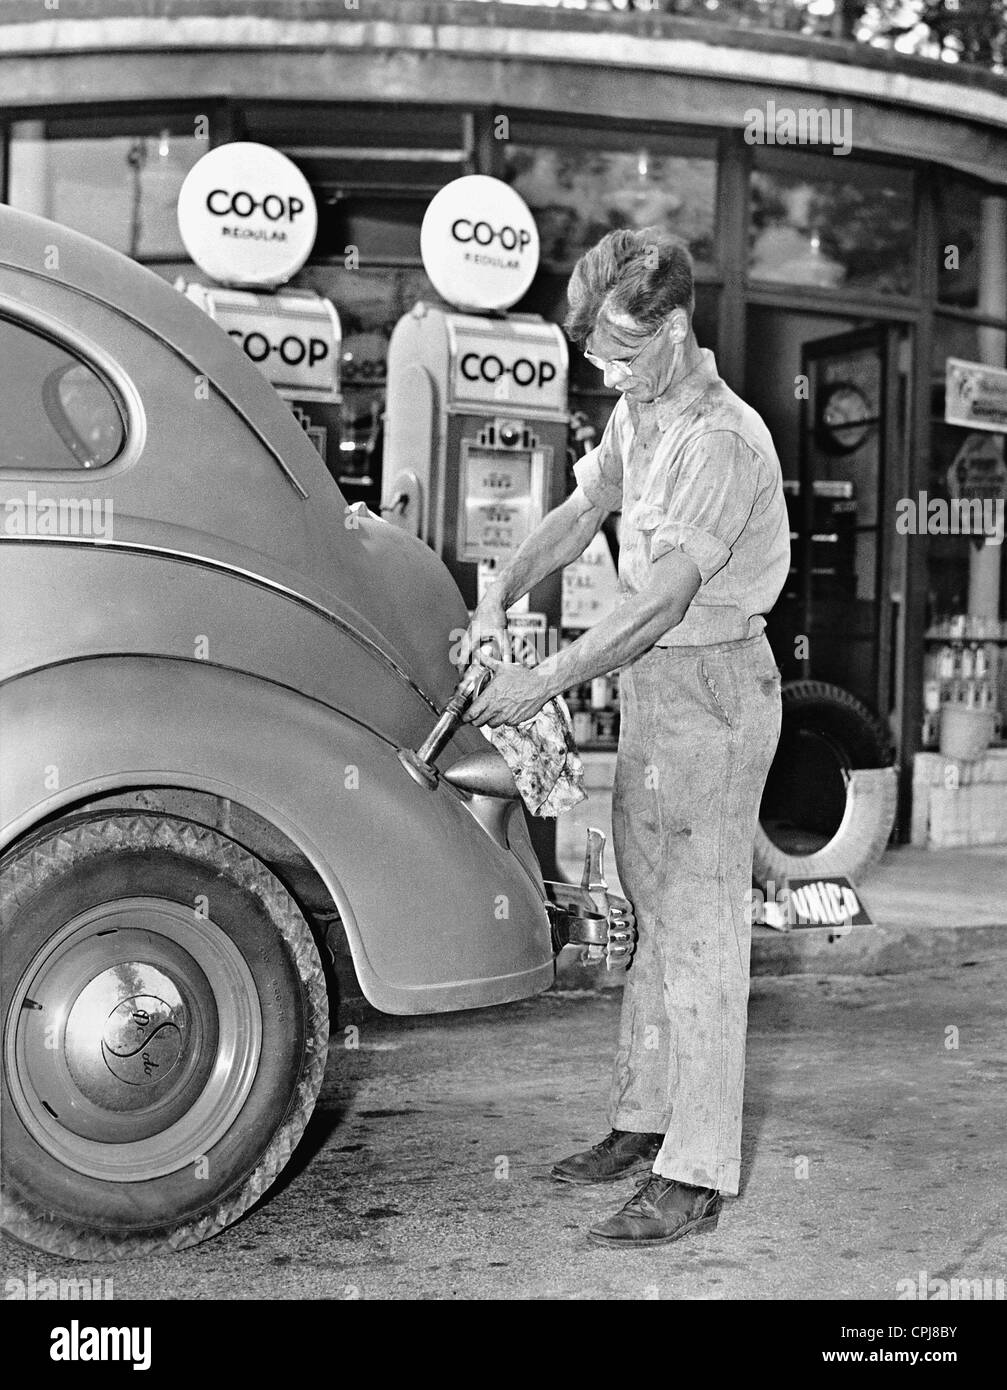 The gas station of a co-op, 1938 Stock Photo